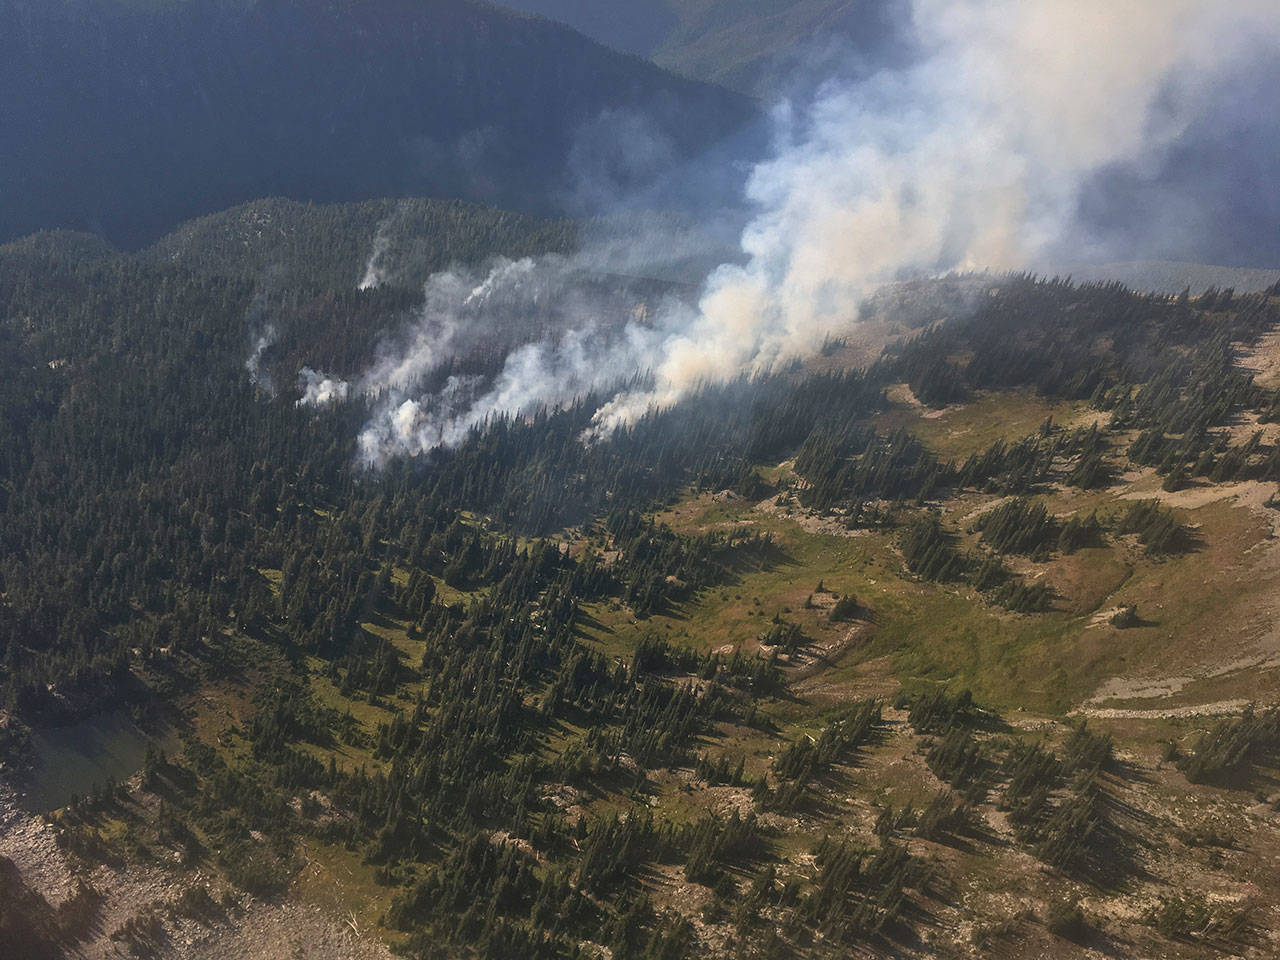 The Mount Dana Fire is seen burning in Olympic National Park. (National Park Service)